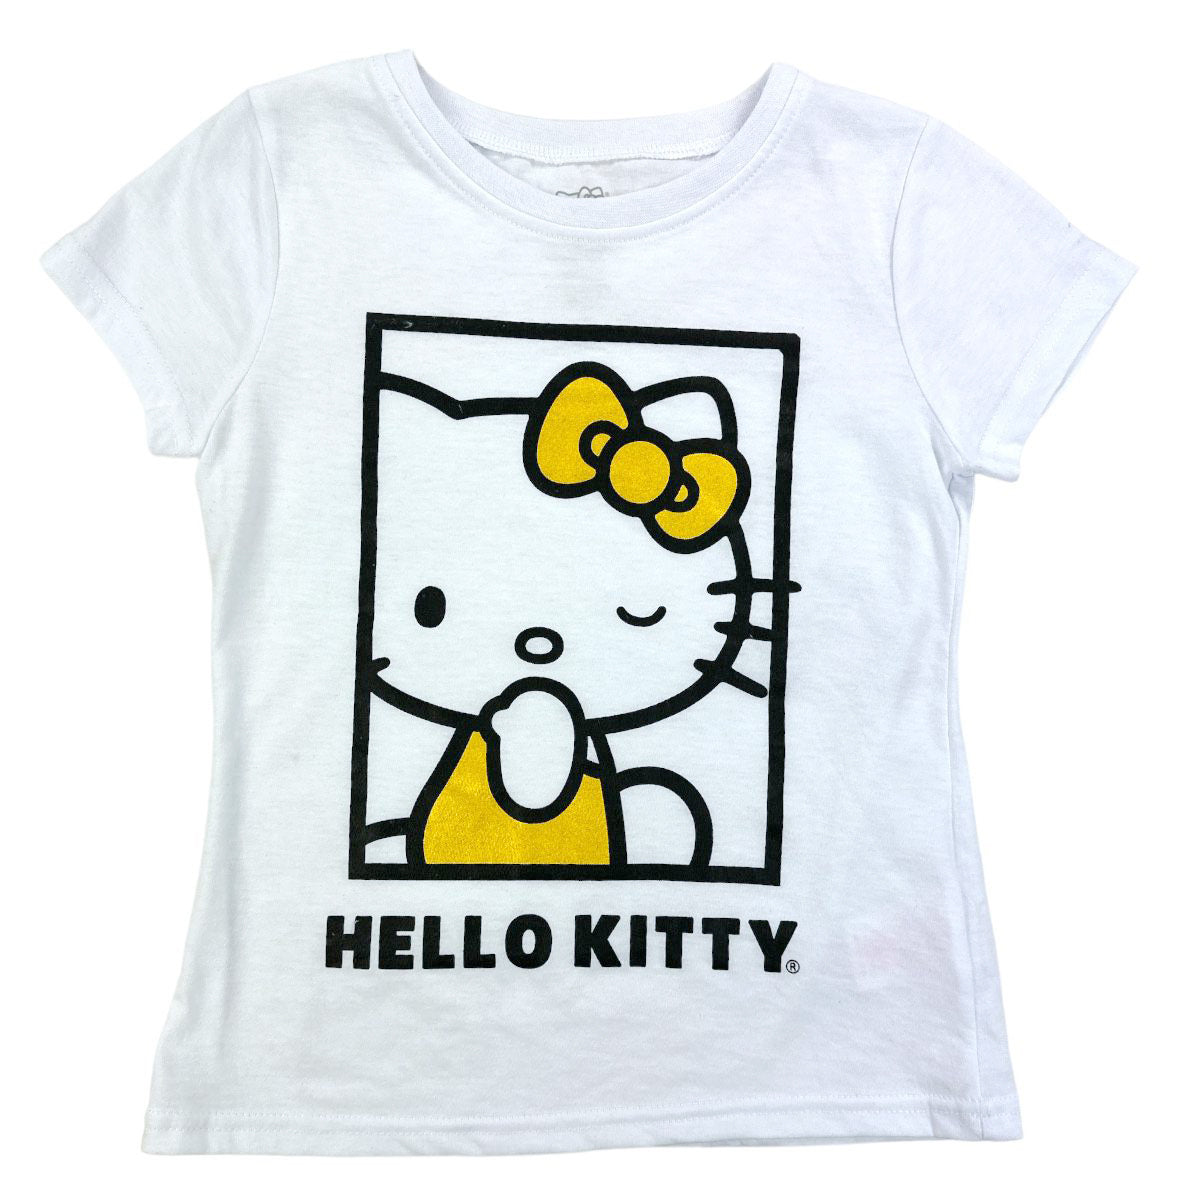 Hello Kitty with Flowers Kids Graphic T-Shirt